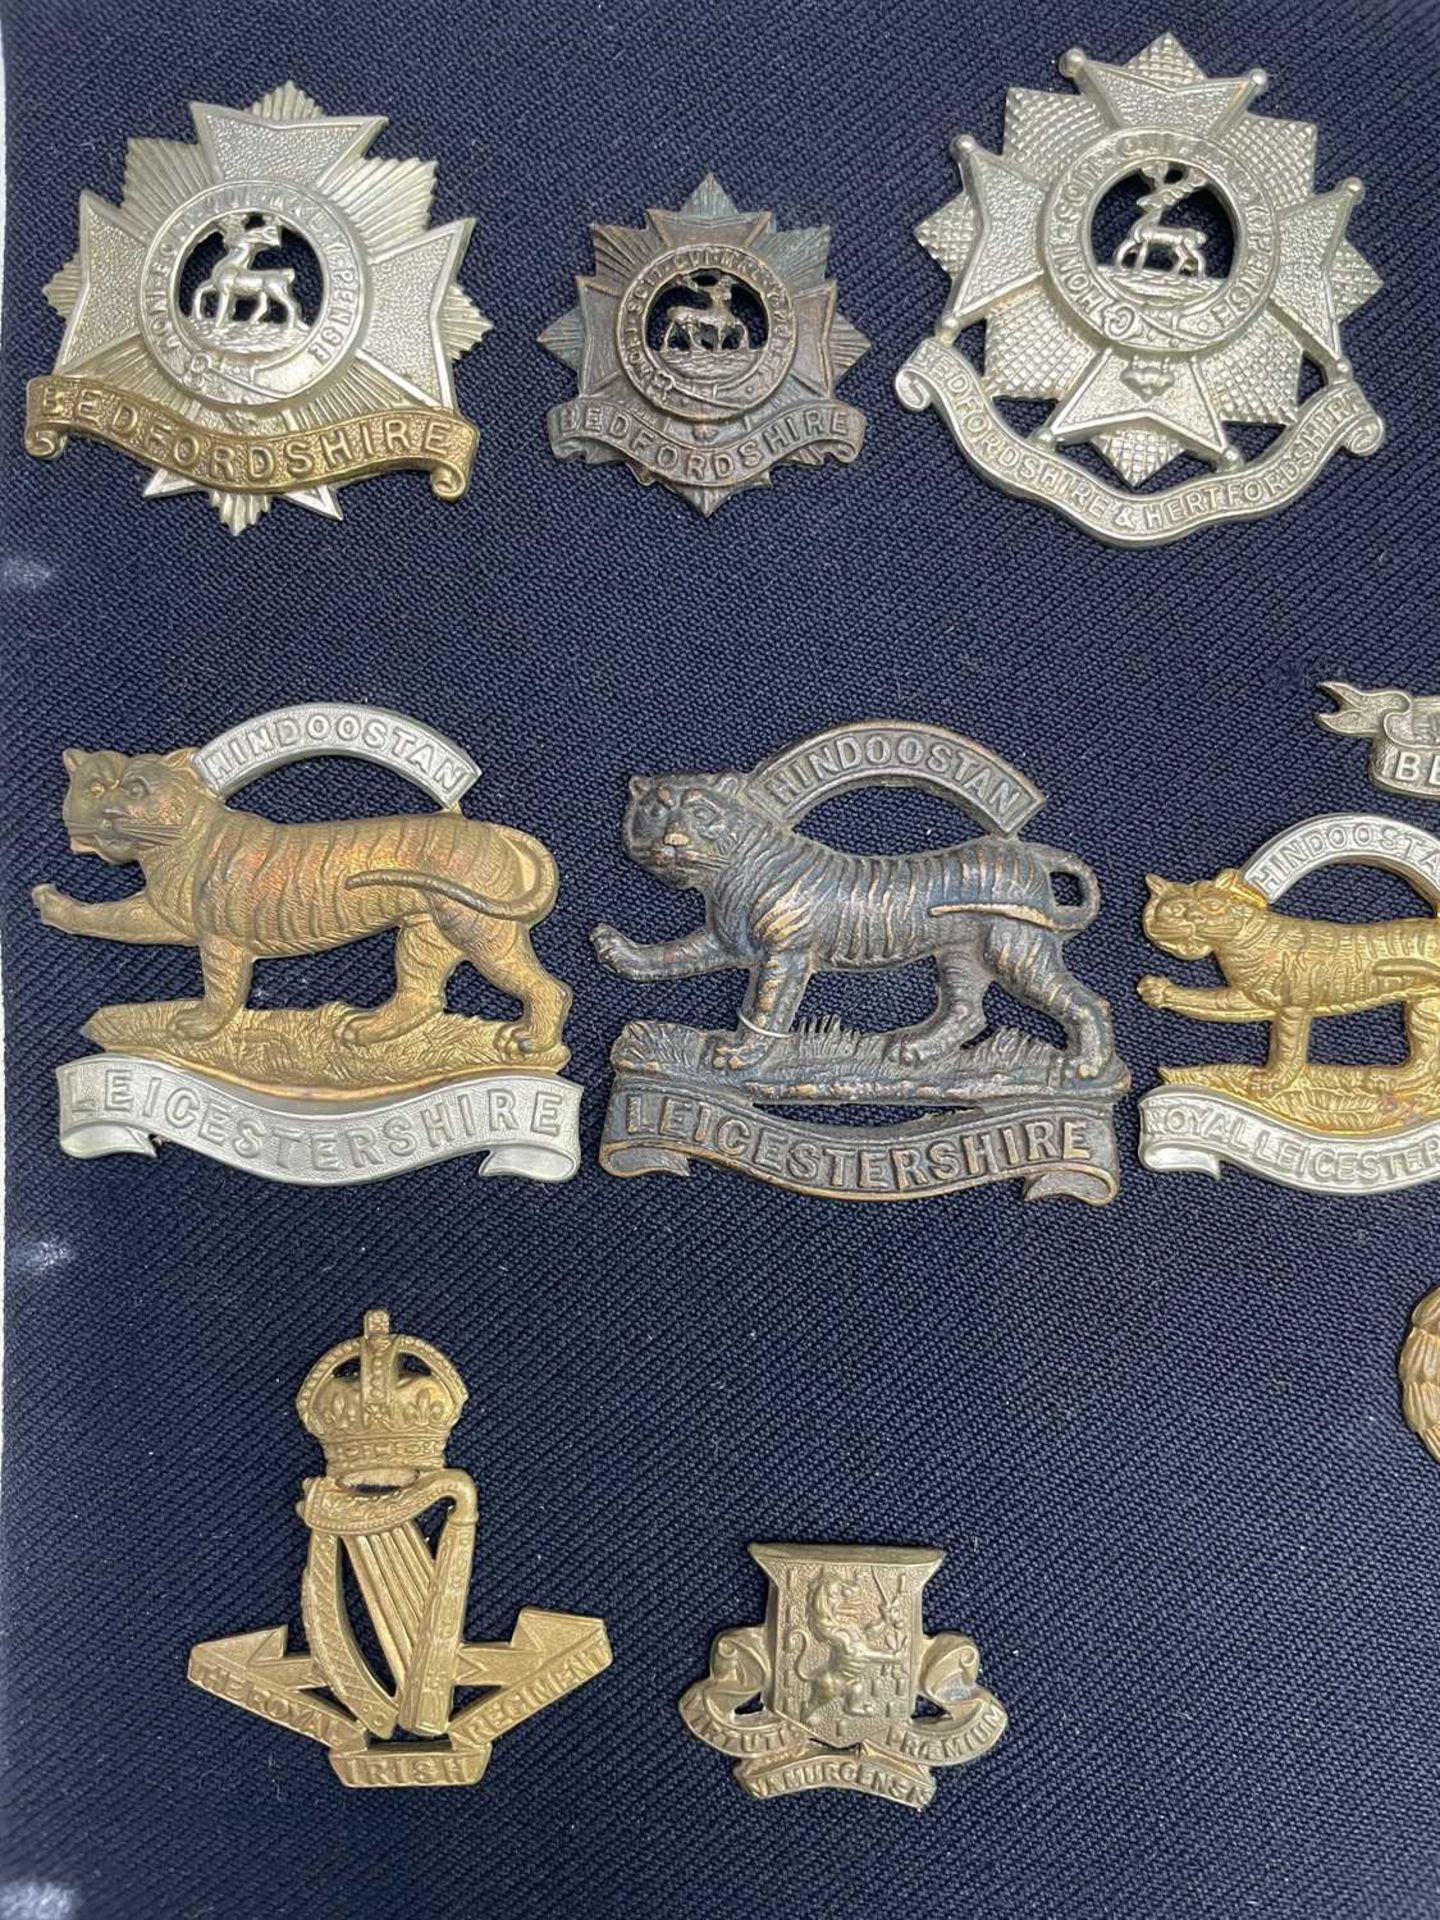 16th - 18th Foot. A display card containing cap badges, collar dogs, shoulder titles and buttons. - Image 8 of 8